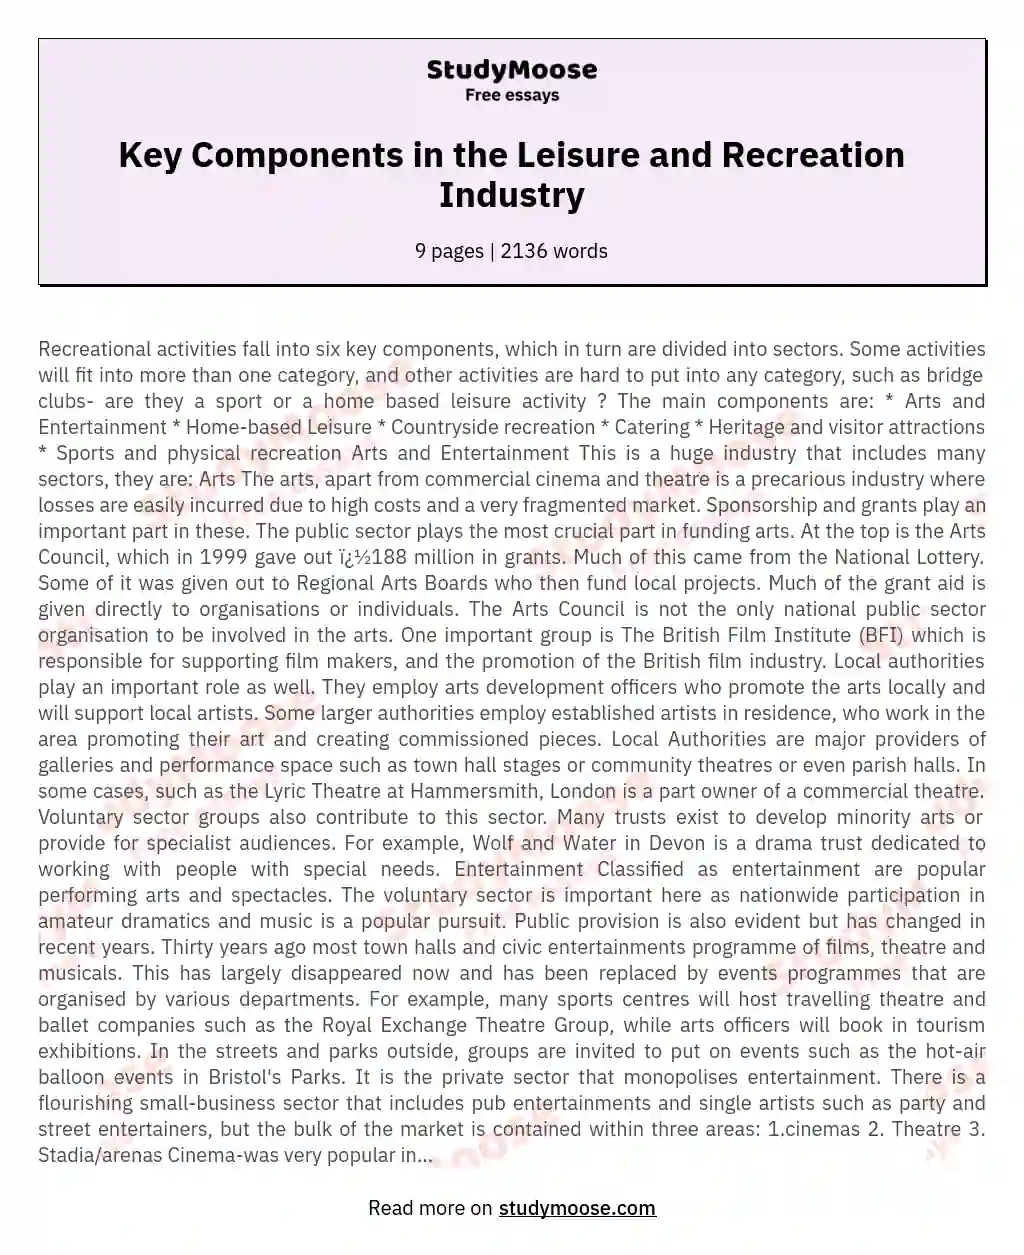 Key Components in the Leisure and Recreation Industry essay